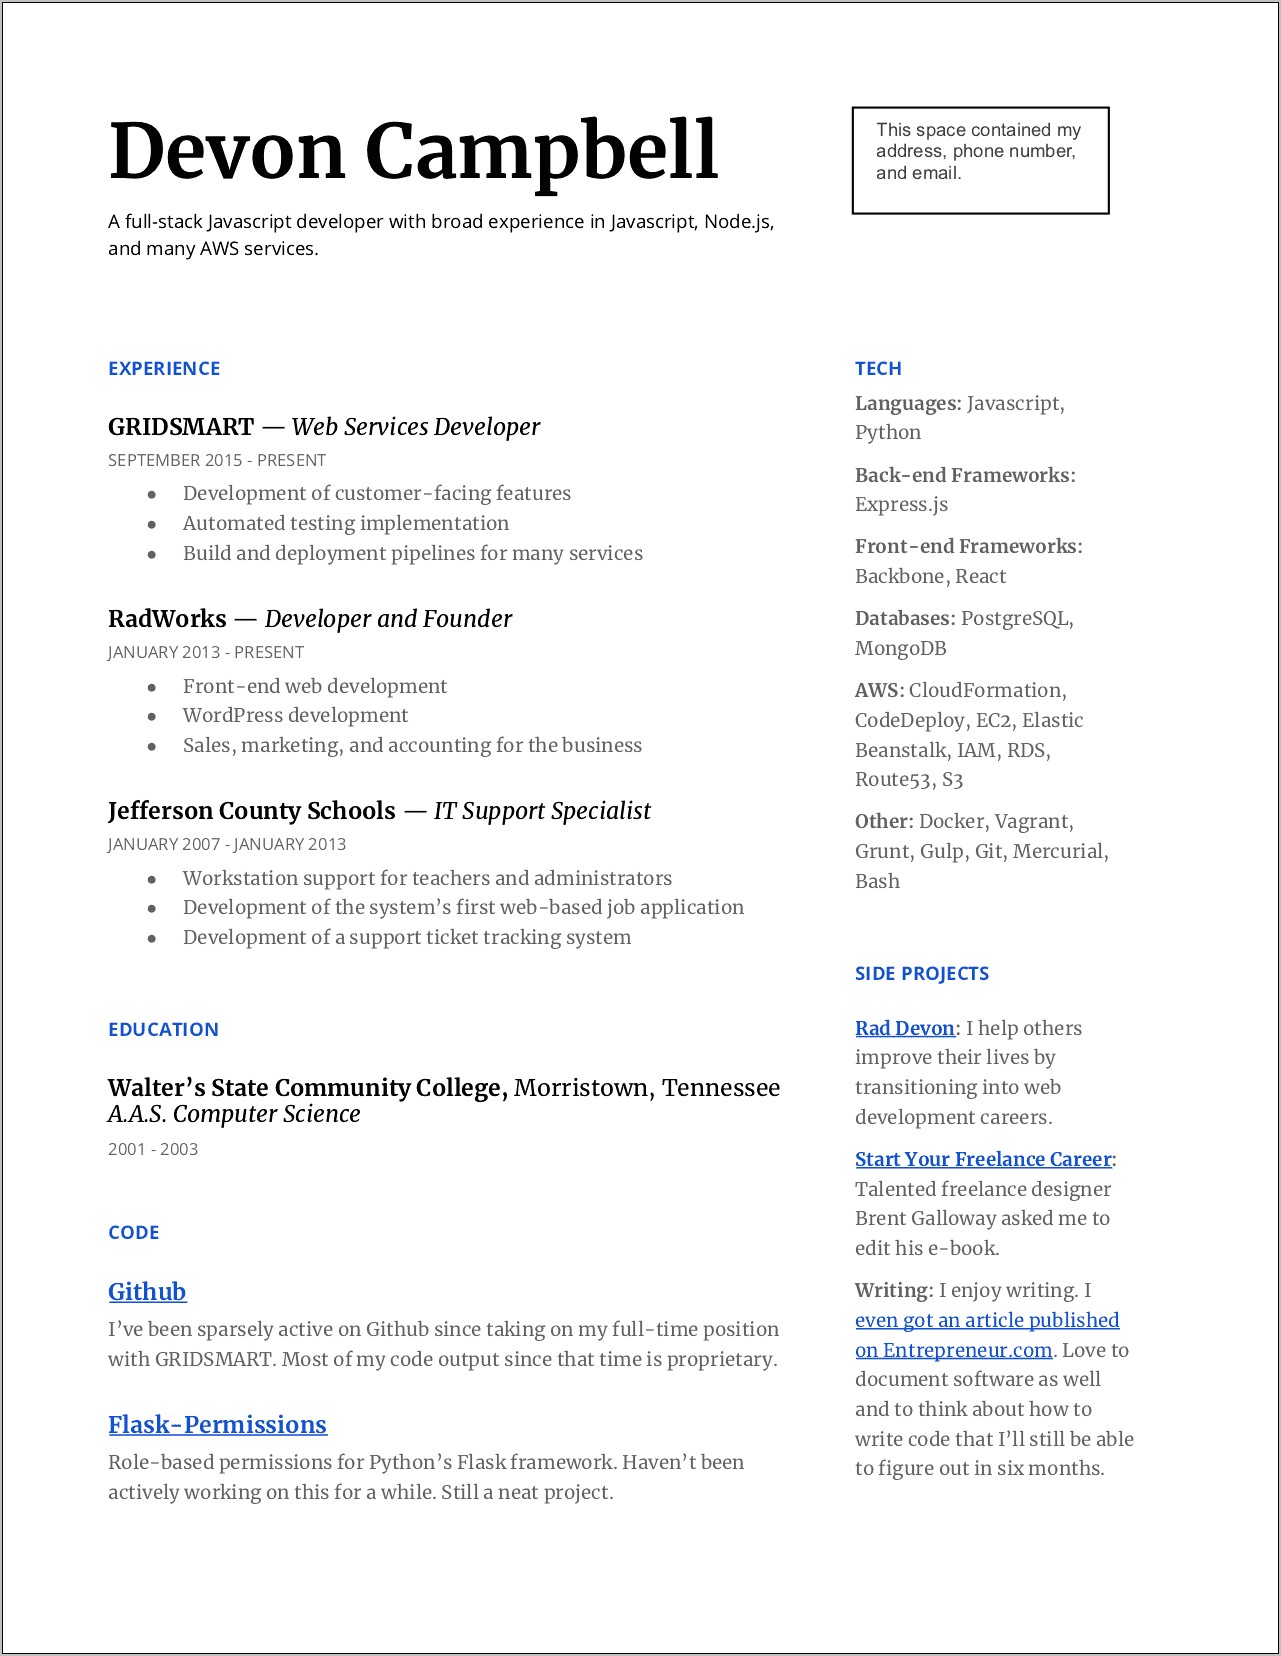 Creating An Education Resume With No Education Experience